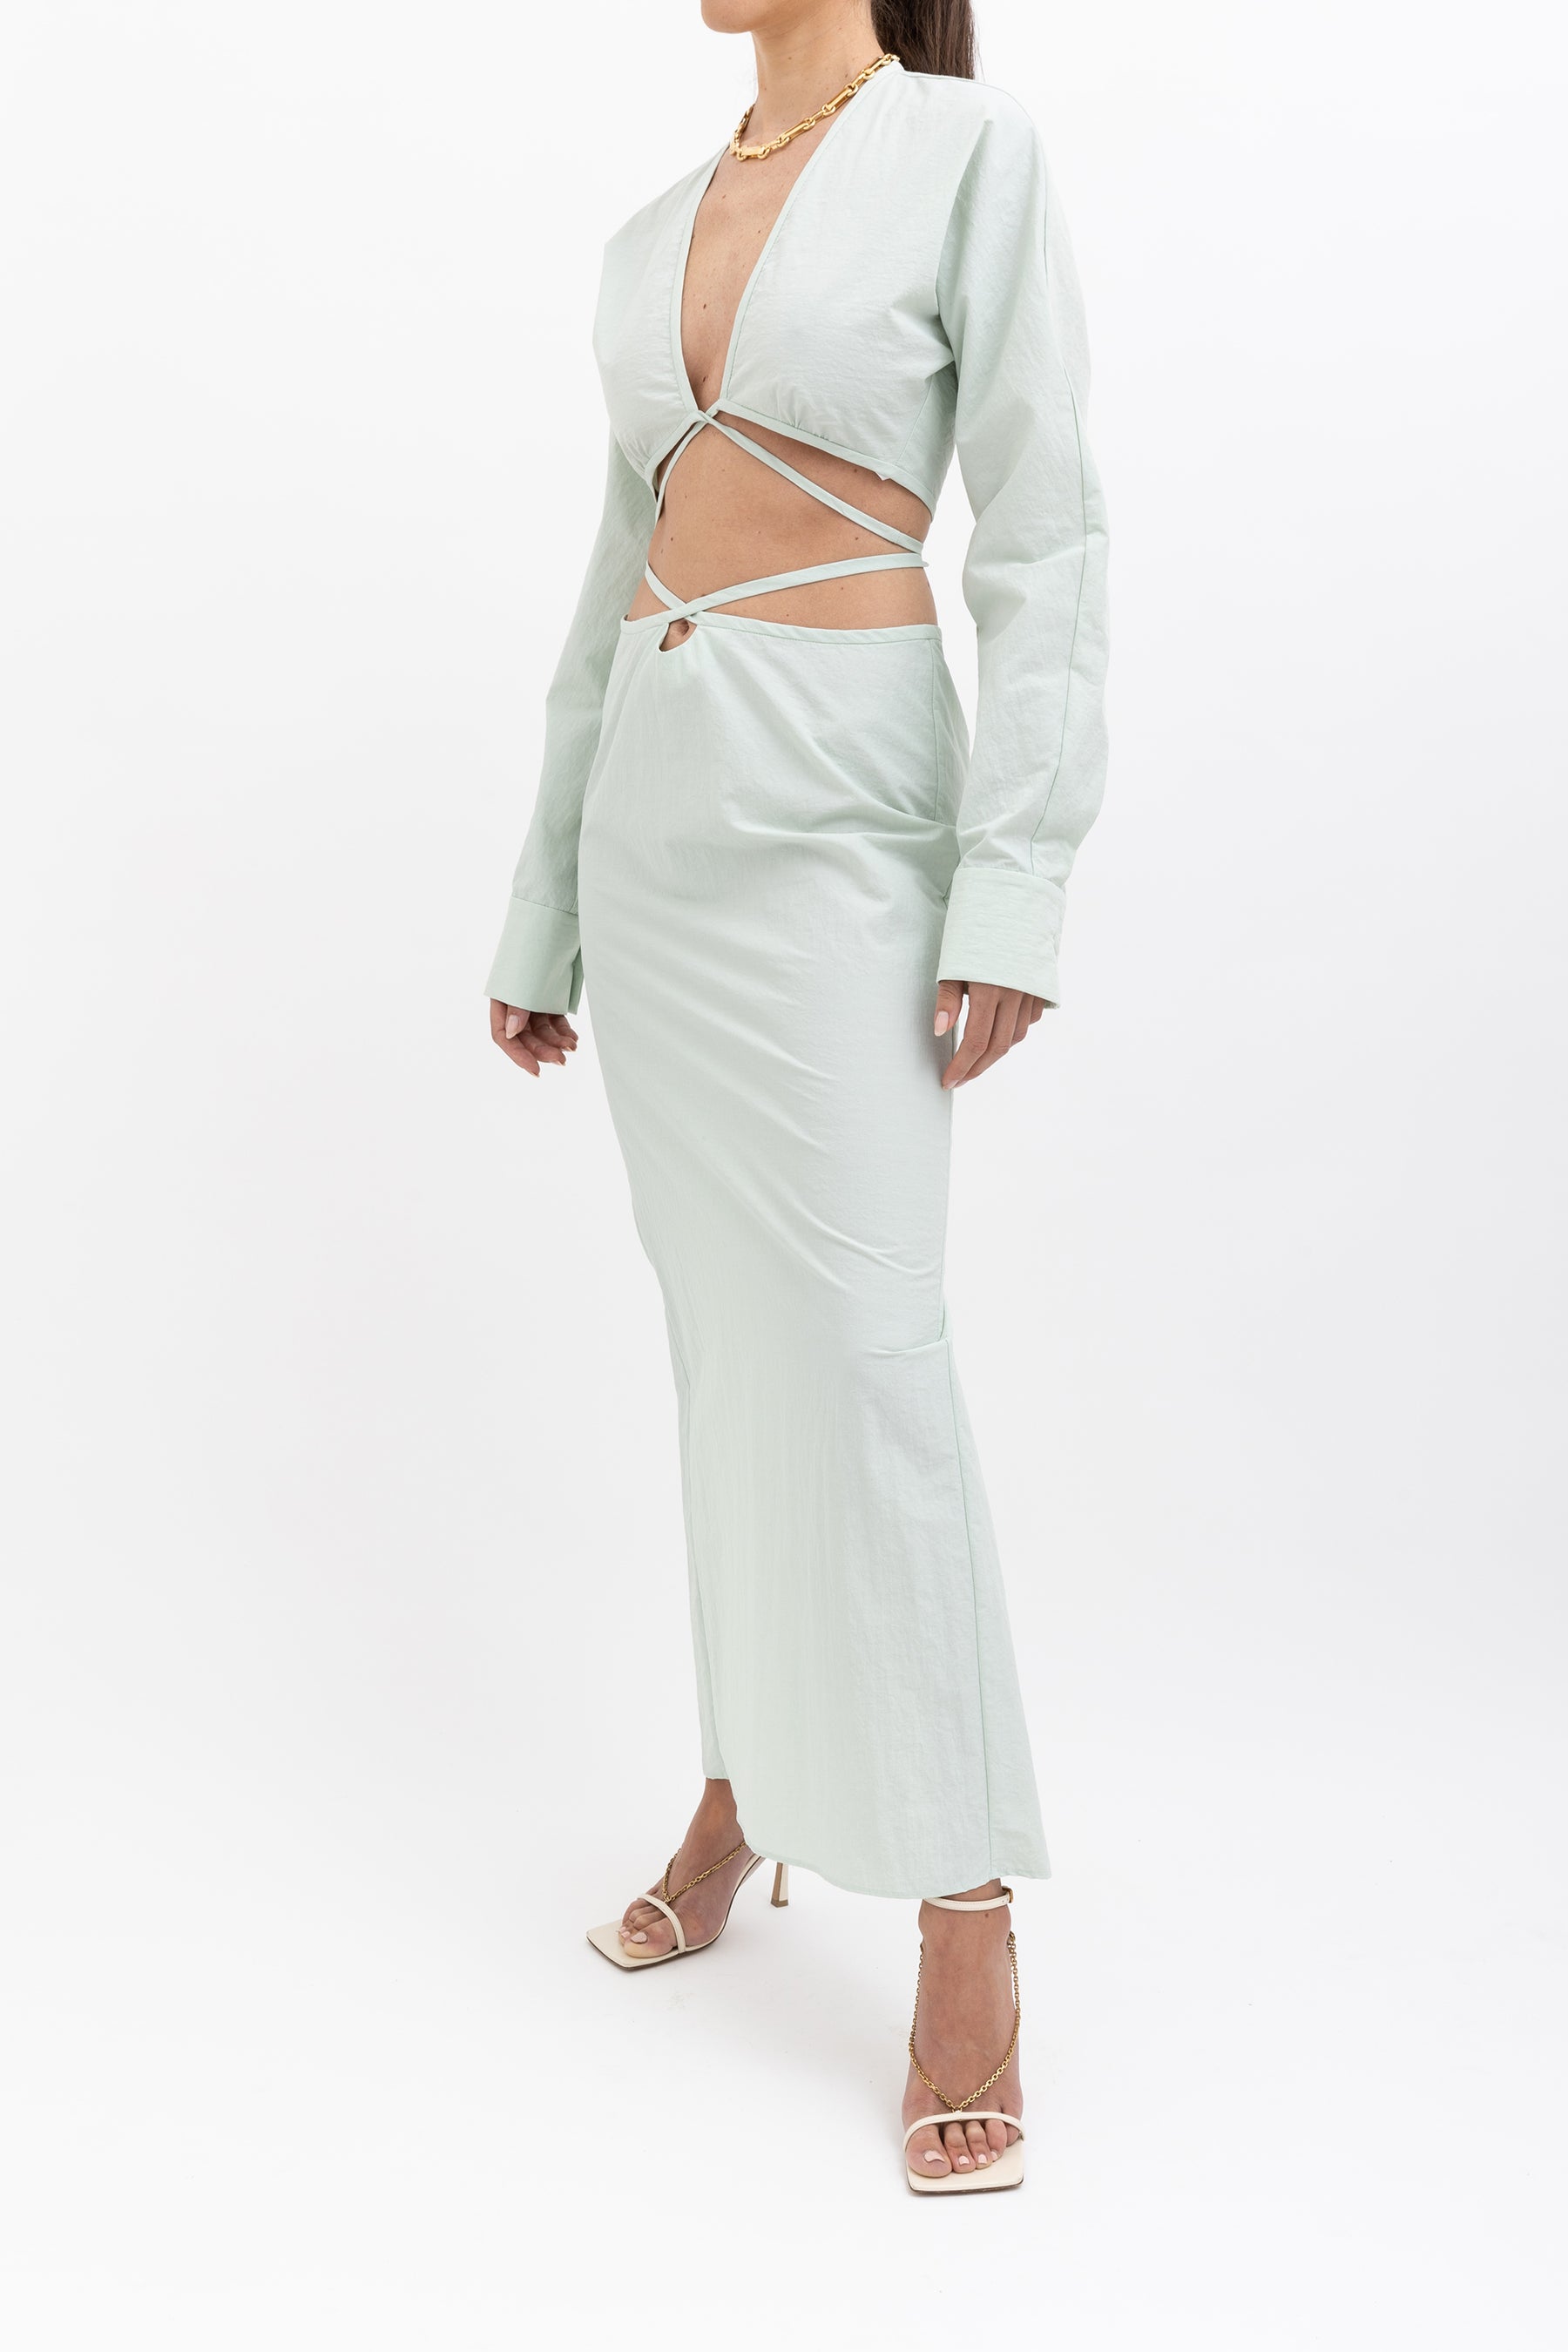 Tech Magyar Cropped Top and Tie Skirt Set